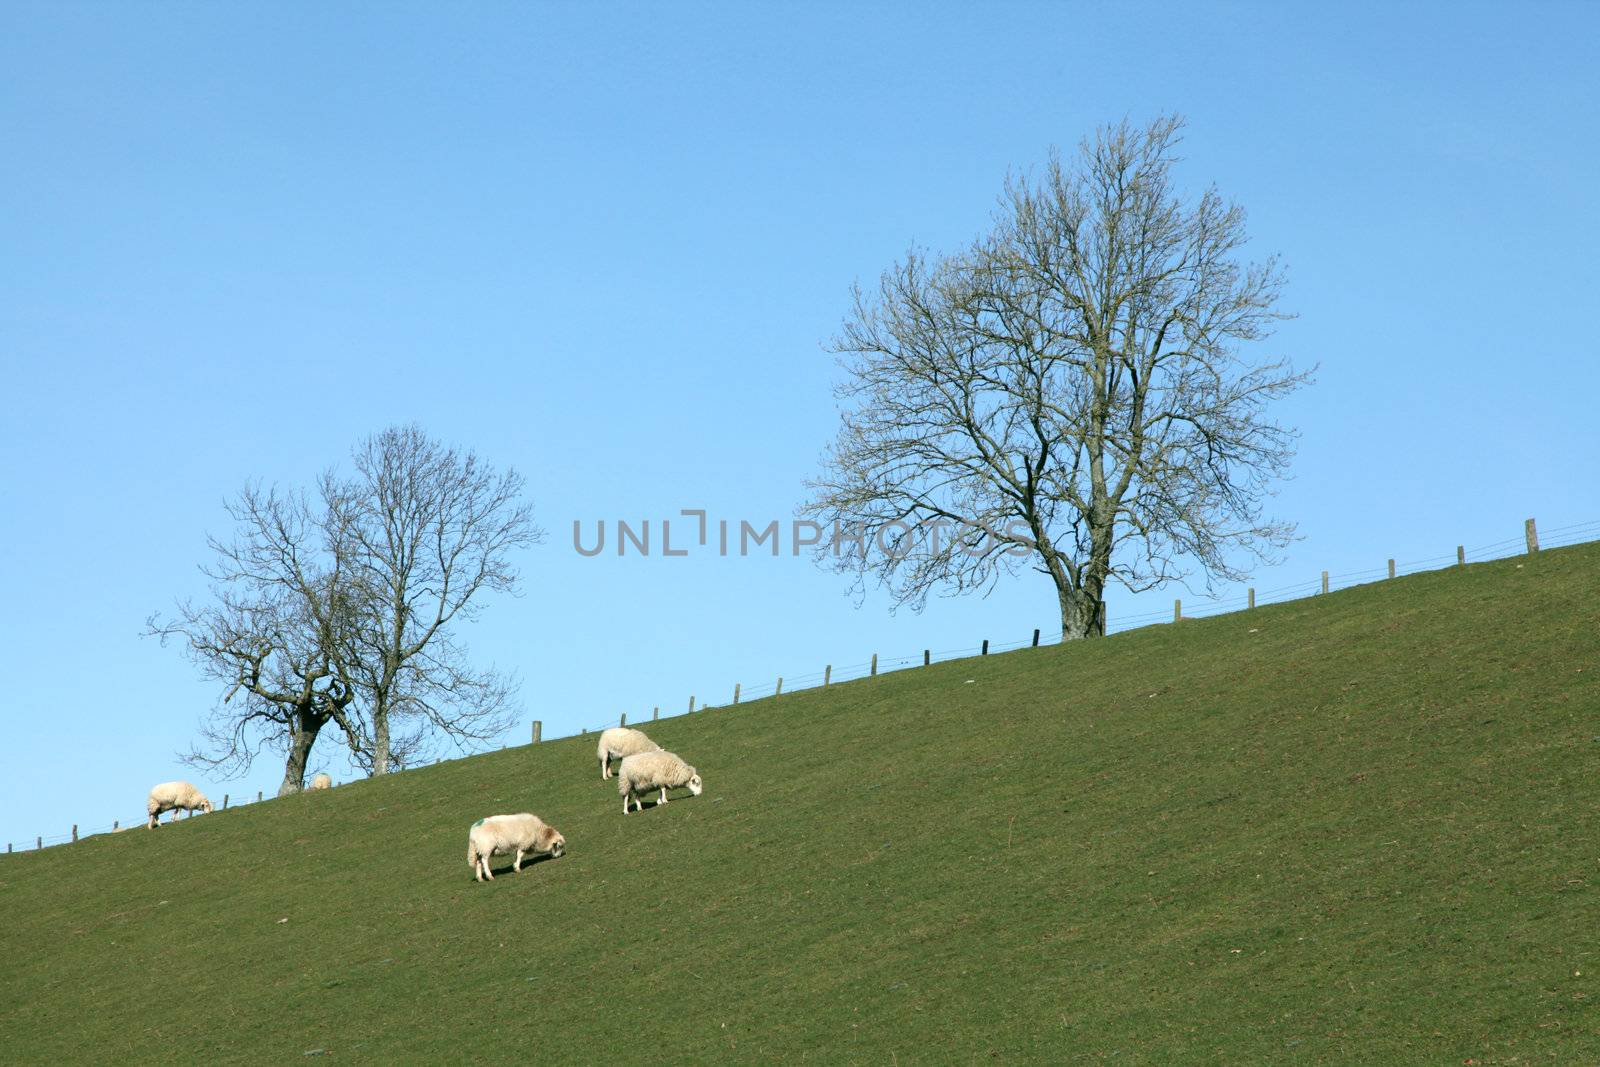 Flock of Sheep in a green meadow